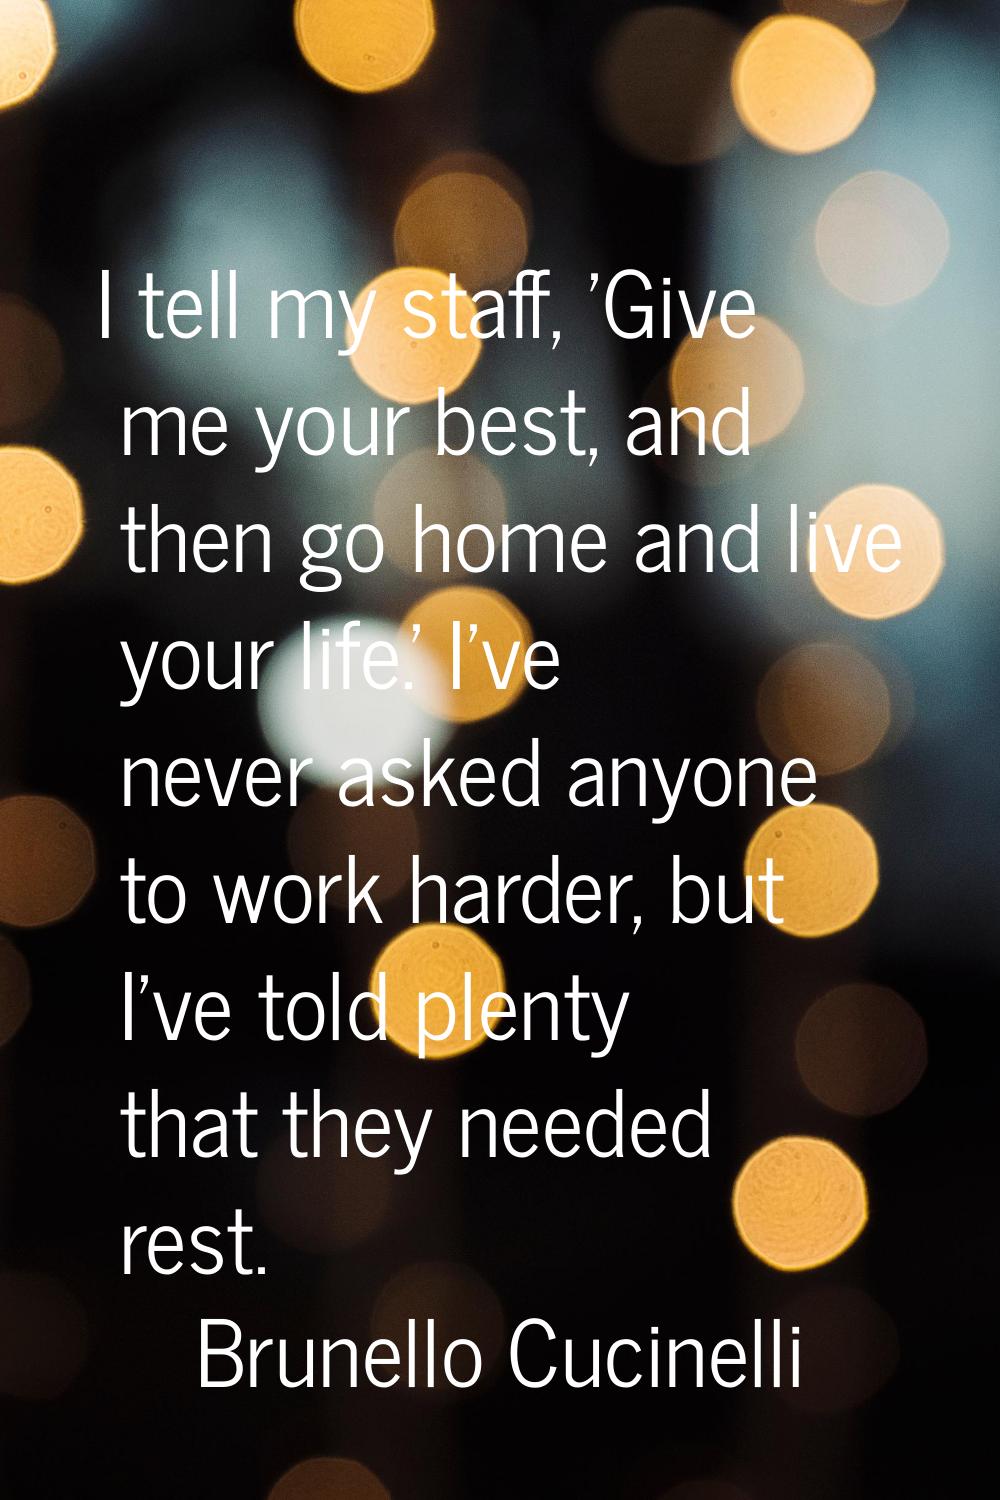 I tell my staff, 'Give me your best, and then go home and live your life.' I've never asked anyone 